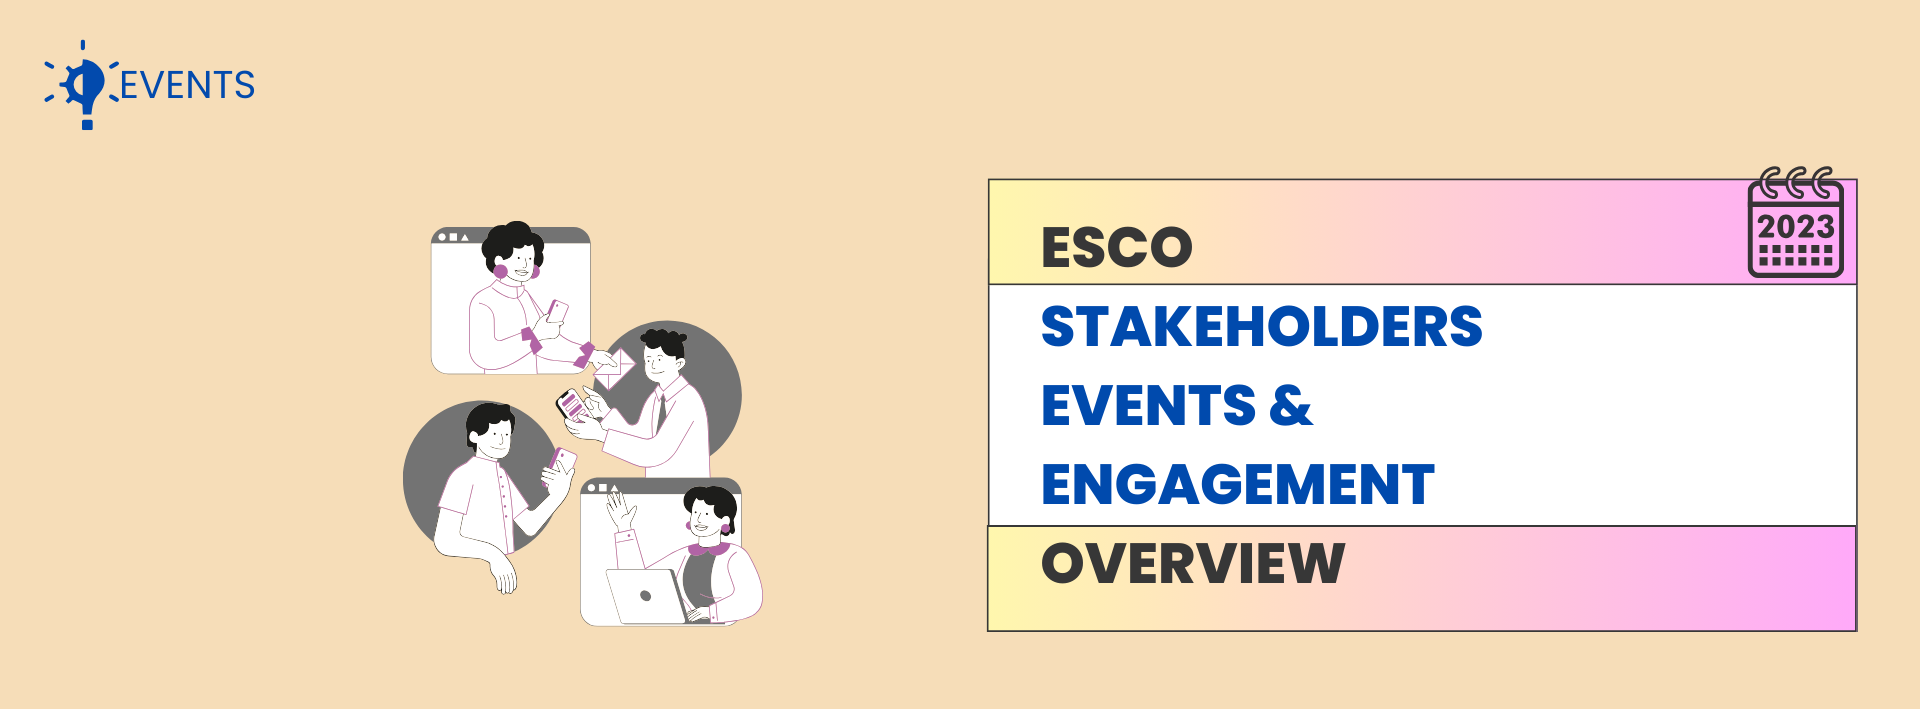 Image stating: ESCO STAKEHOLDERS  EVENTS & ENGAGEMENT OVERVIEW and showing icon of people speaking/discussing 